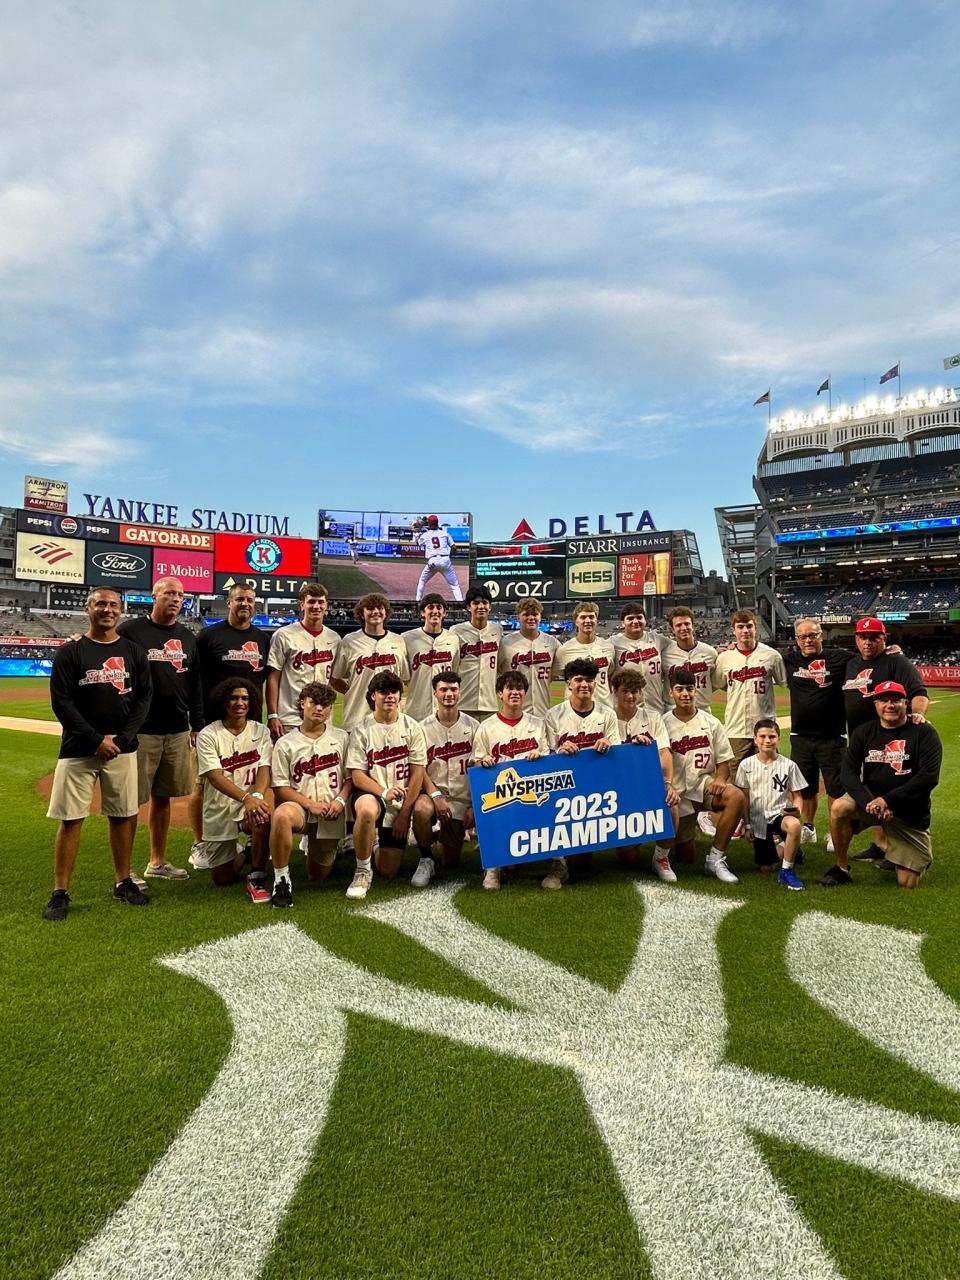 The Roy C. Ketcham baseball team poses behind home plate at Yankee Stadium on Sept. 7, 2023. After winning a high school state championship in June, the team was honored by the New York Yankees.